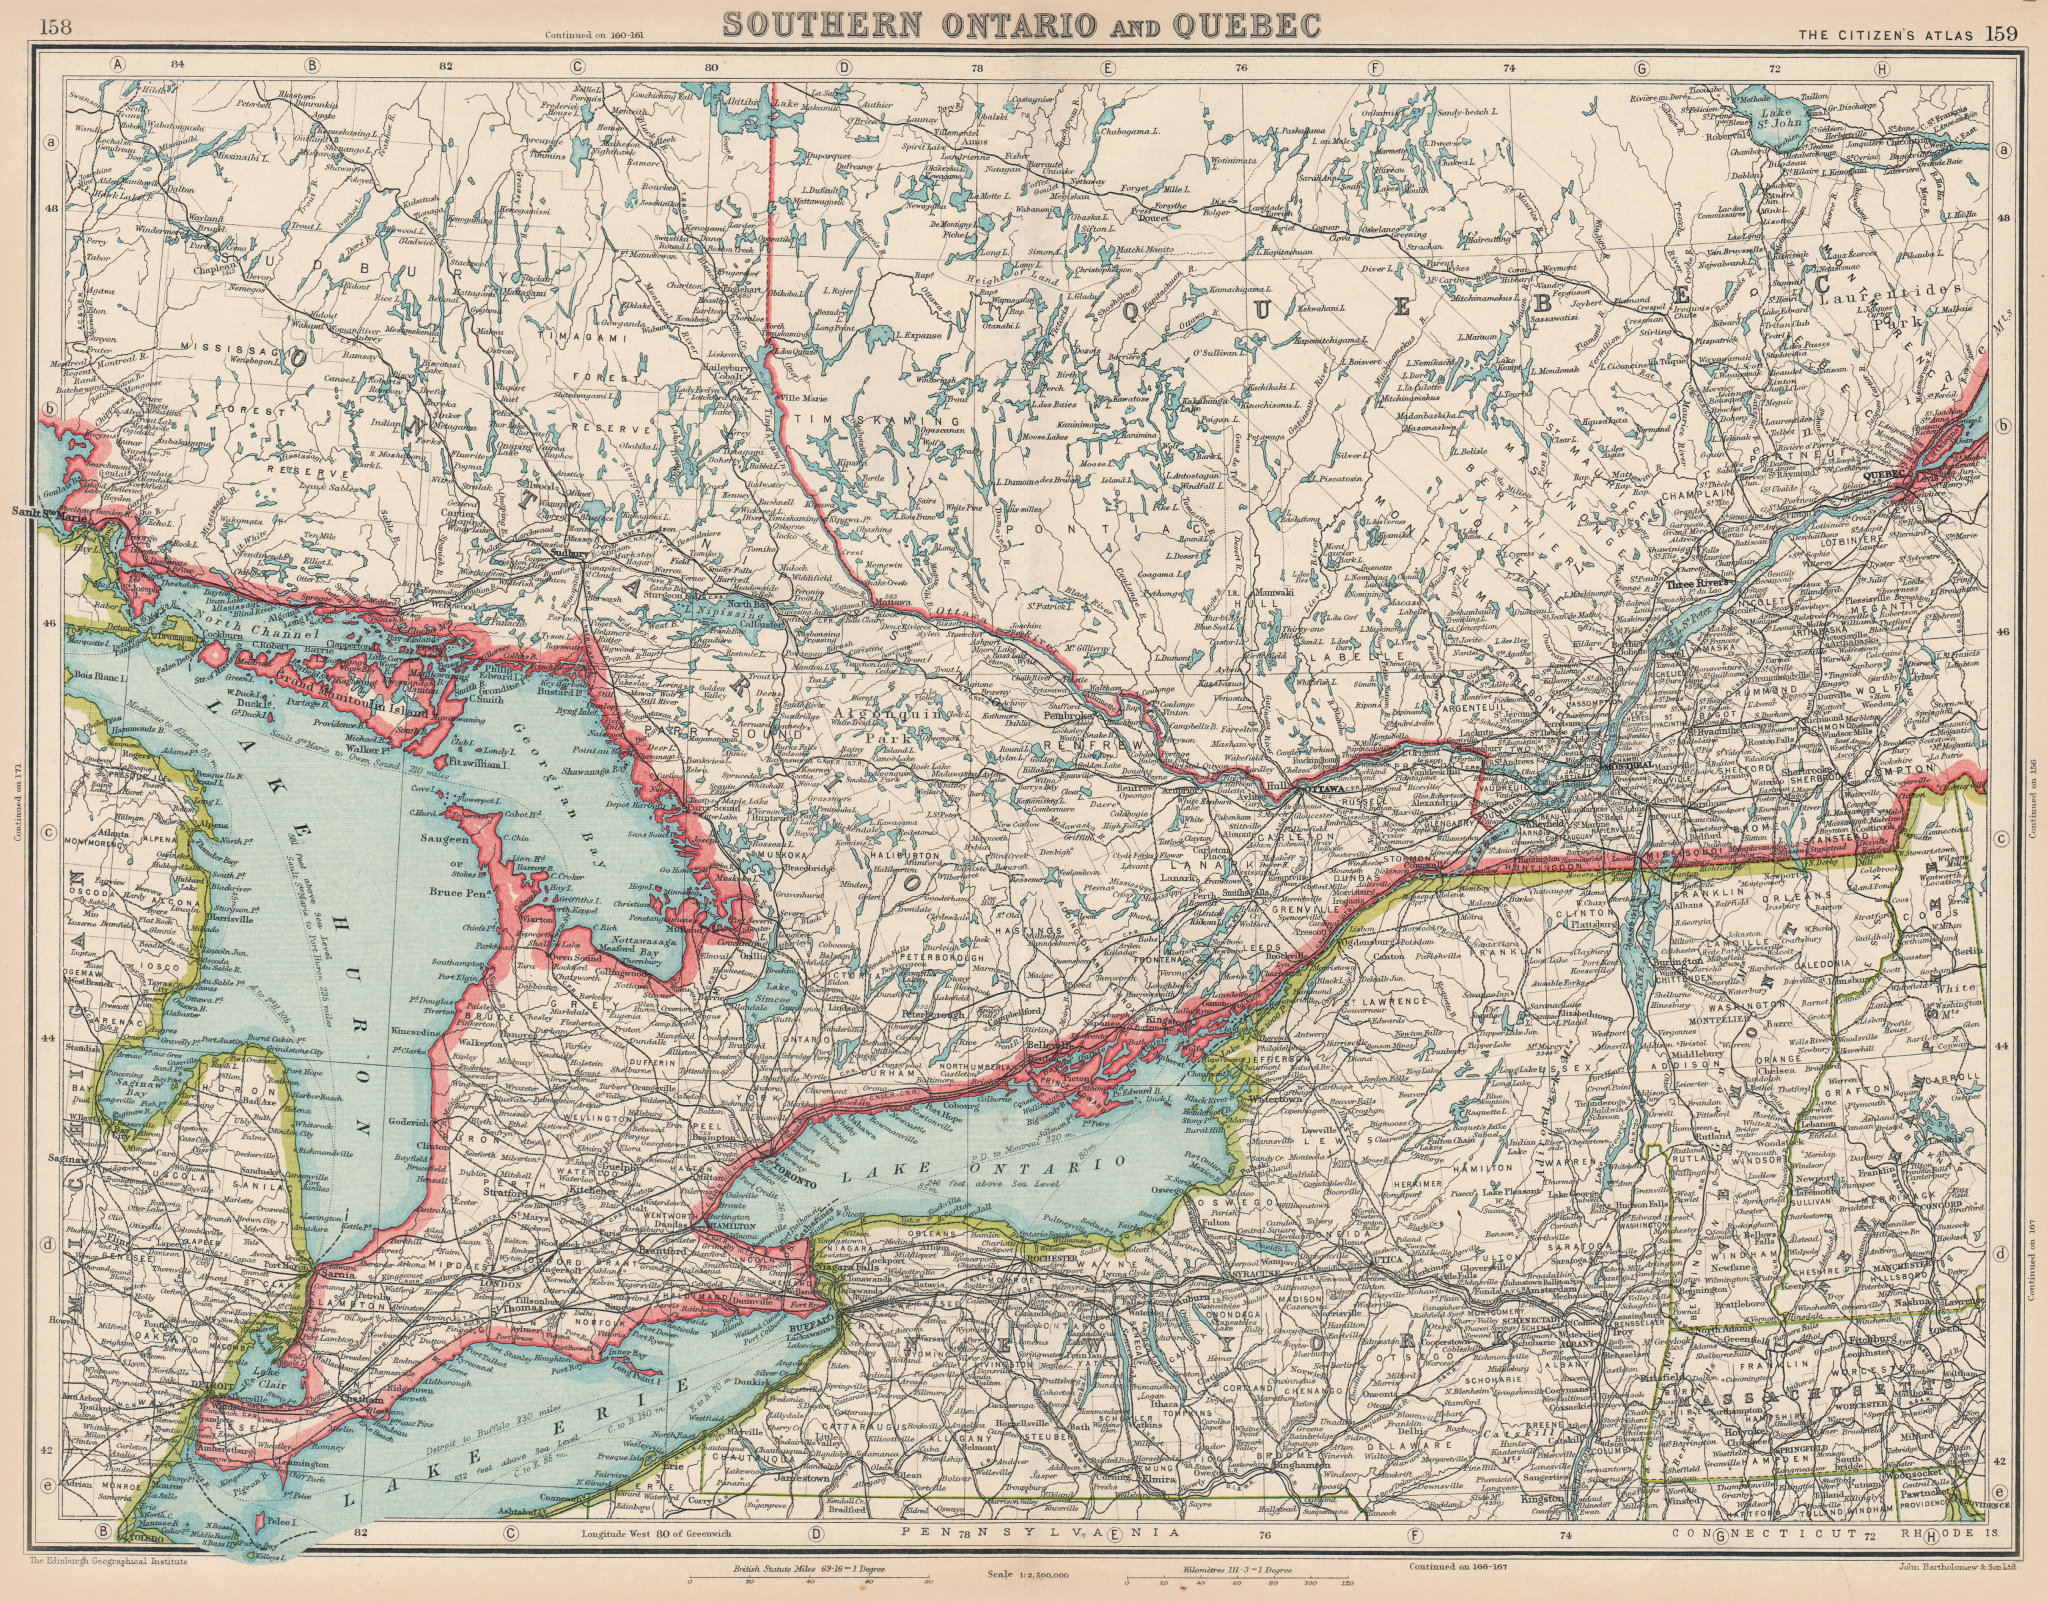 Associate Product CANADA. Southern Ontario and Quebec. BARTHOLOMEW 1924 old vintage map chart